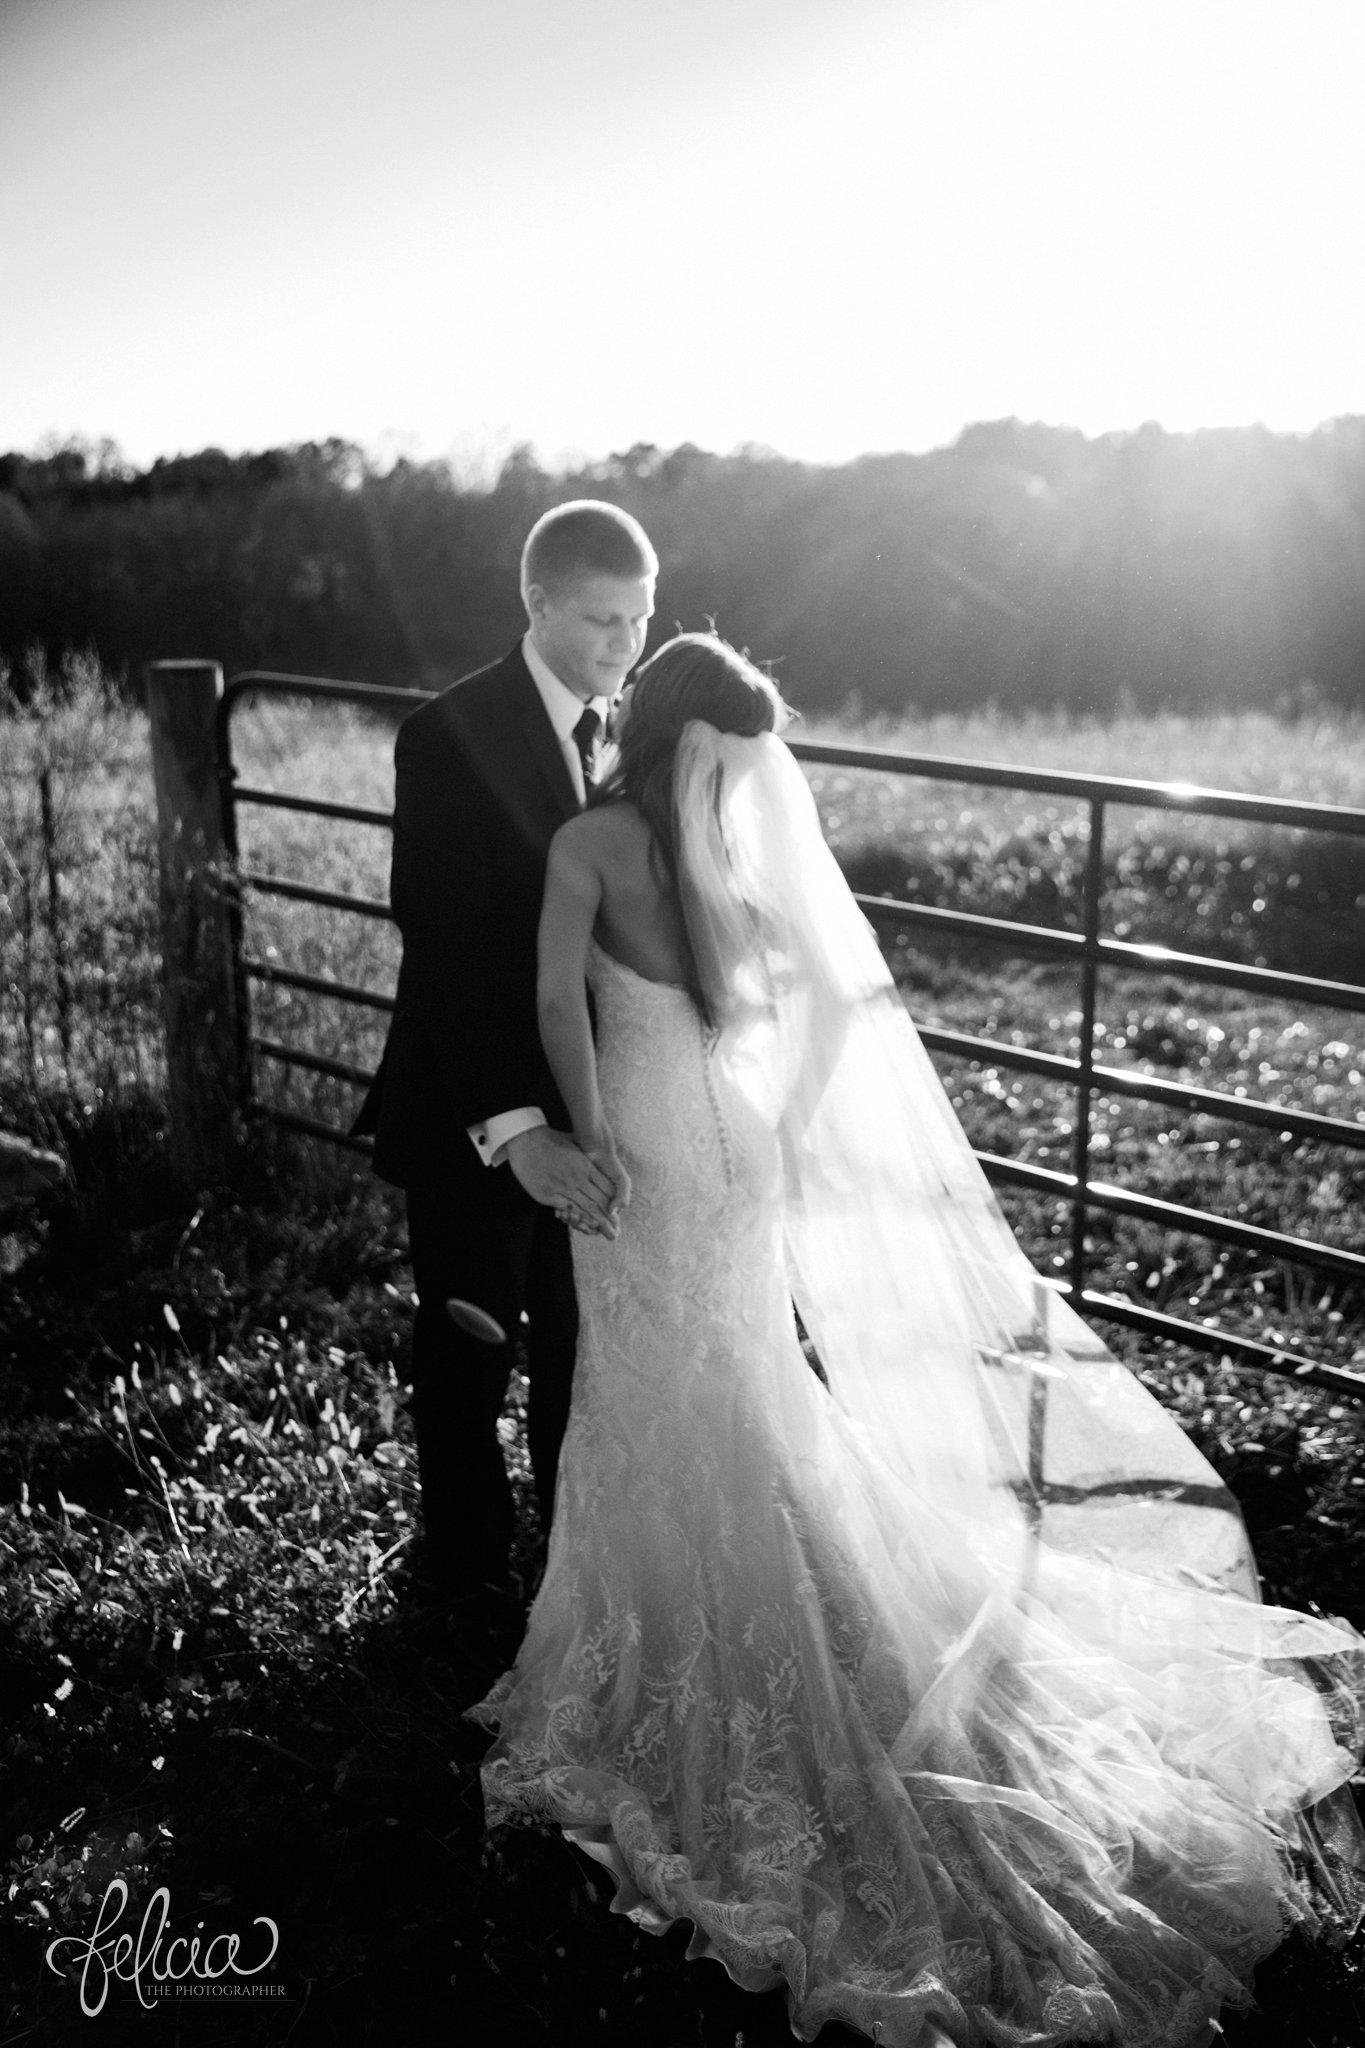 black and white | wedding | wedding photos | Rumely Event Space | wedding photography | images by feliciathephotographer.com | field background | nature | bride and groom portraits | sunlight | romantic sun | romance | sun flare | romantic pose | embrace | Wild Hill Flowers | fence 